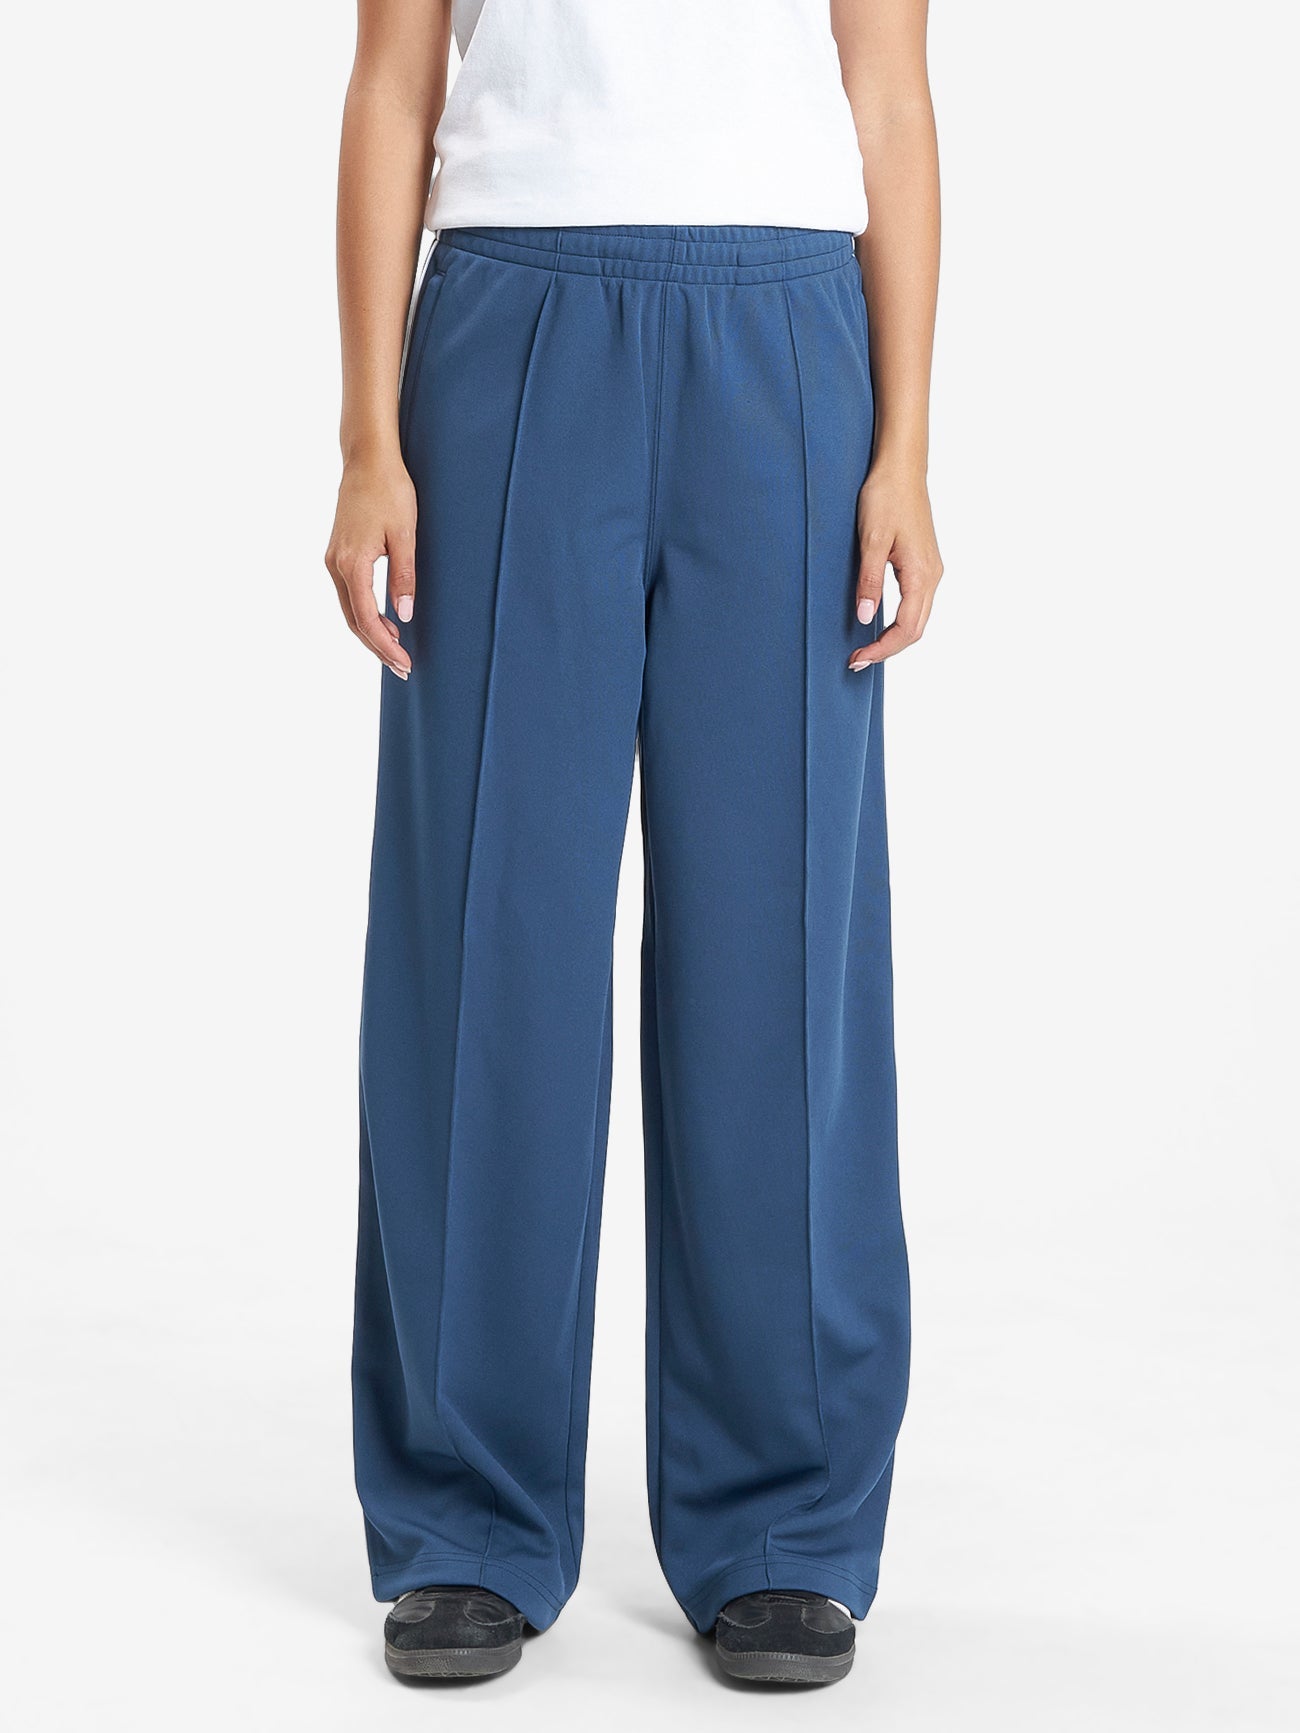 Sphere Tricot Track Pant - Ensign Blue 4